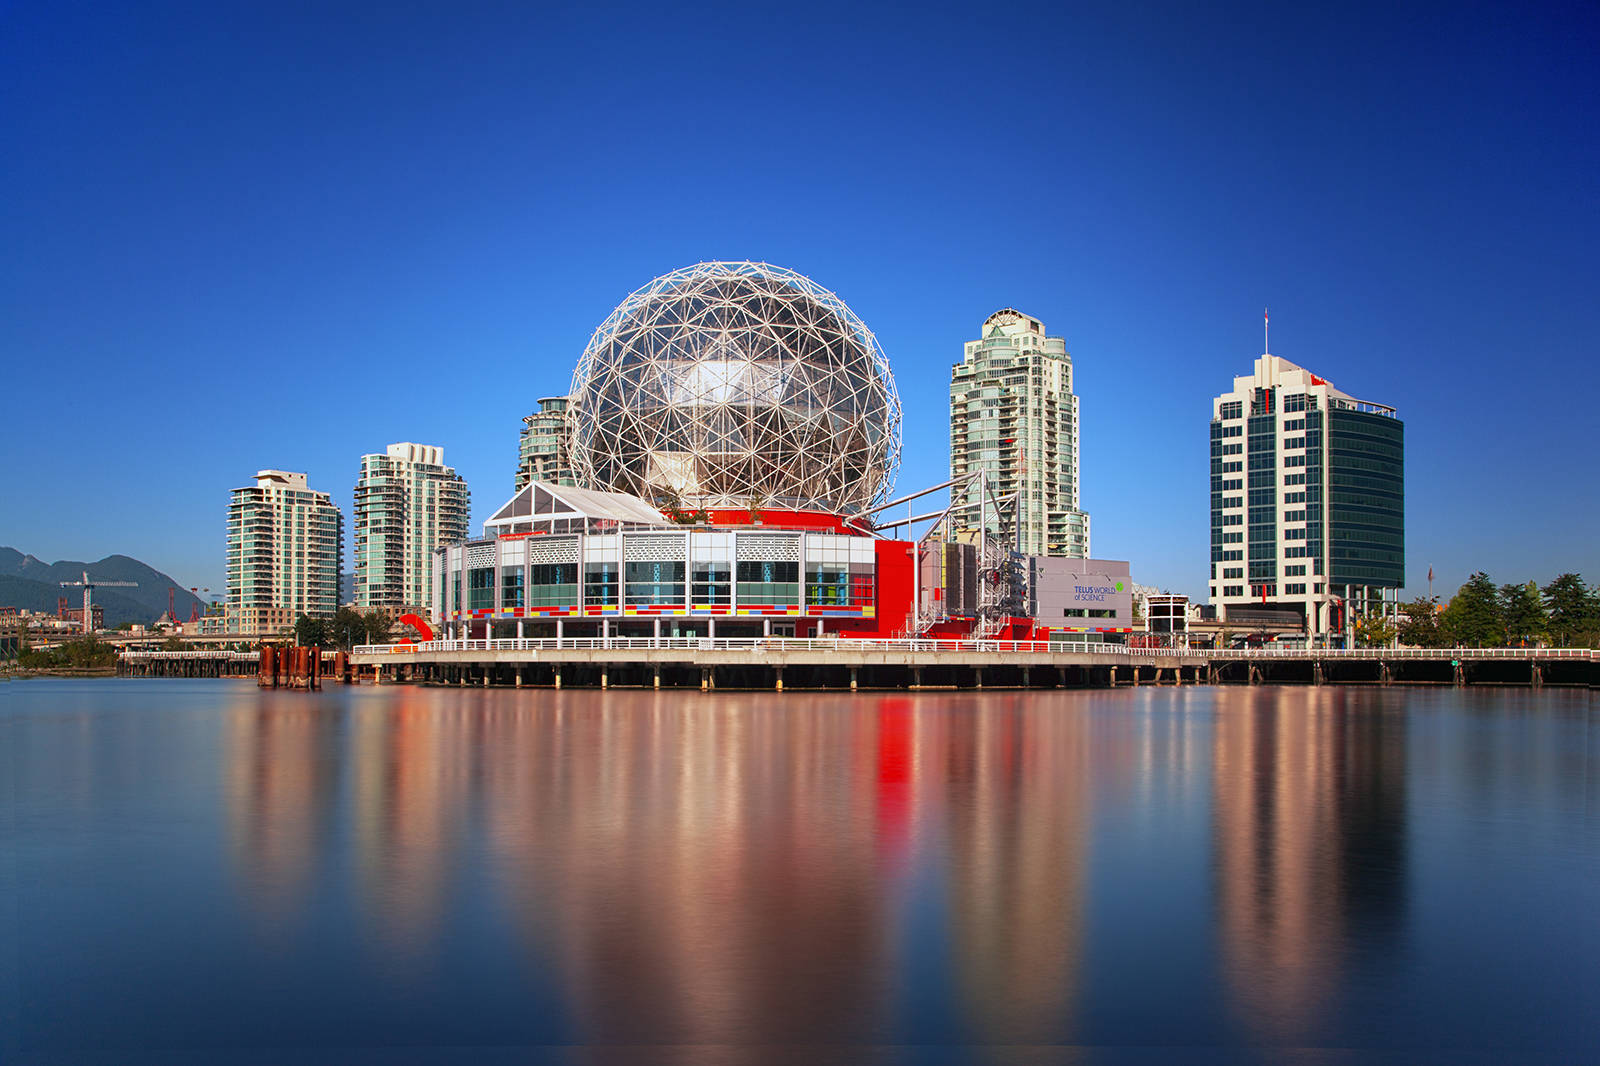 Gift certificates to museums, galleries, and, yes, Science World, are always the right size!